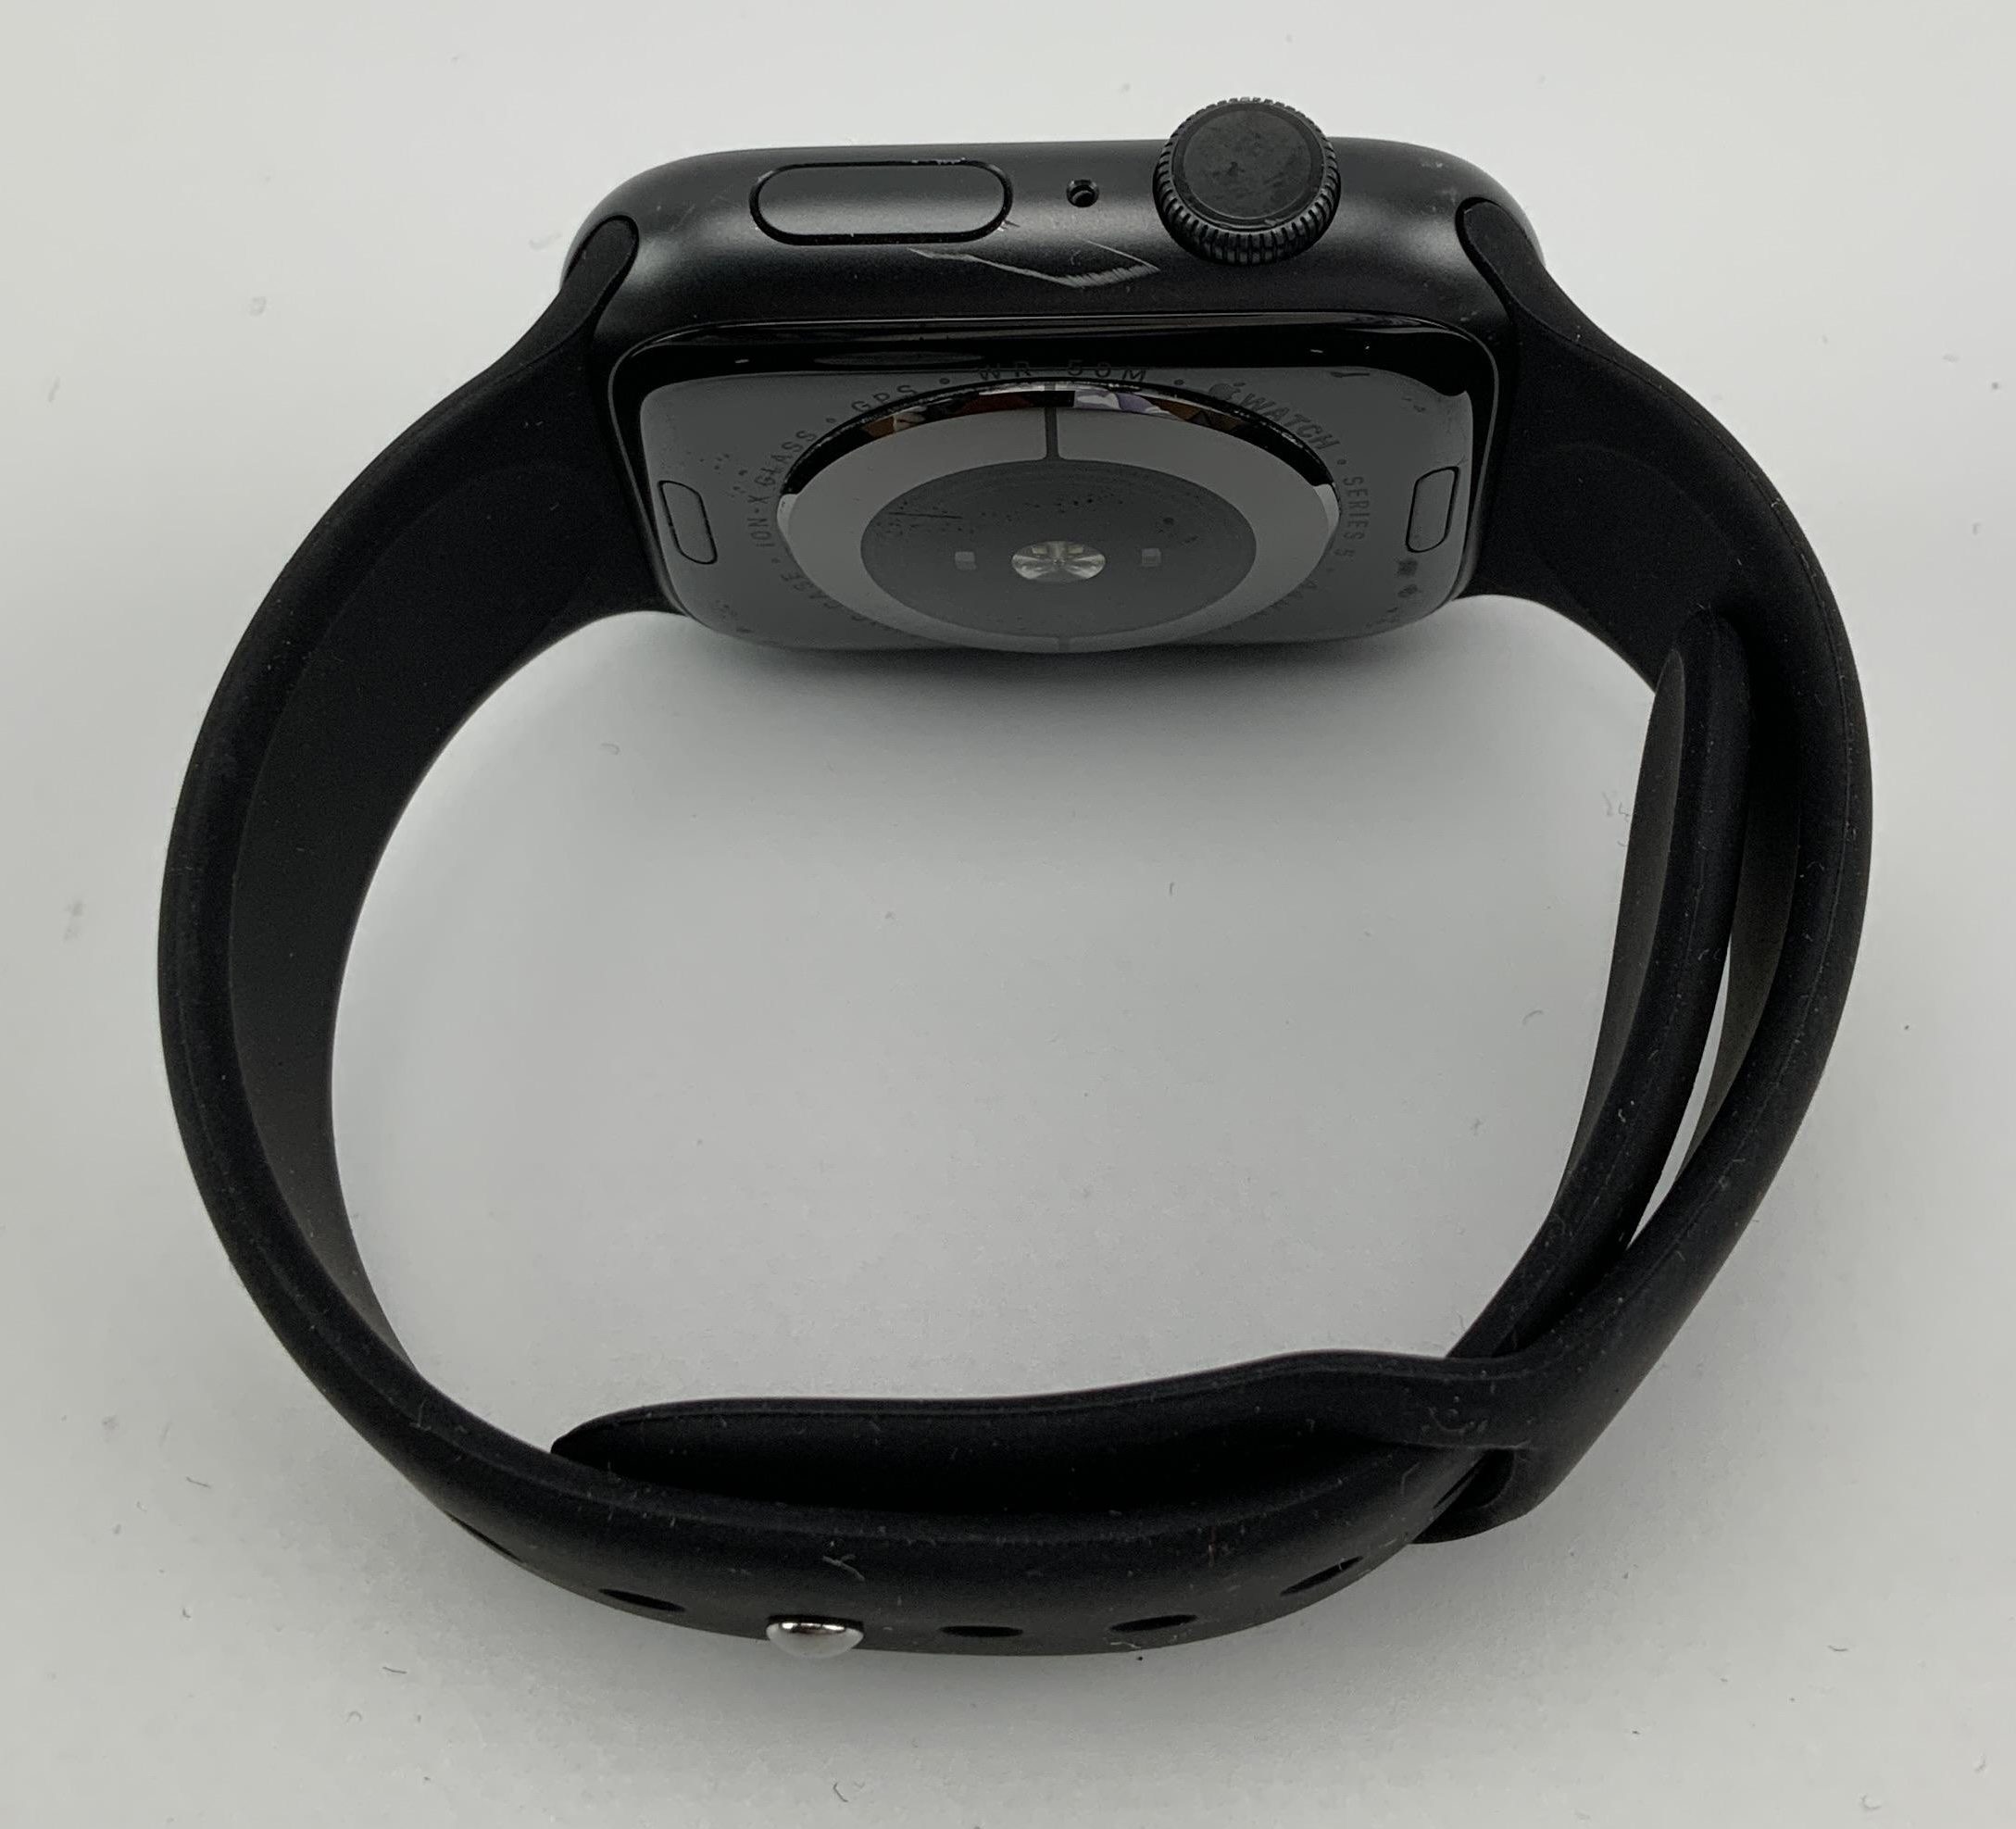 Watch Series 5 Aluminum (44mm), Space Gray, image 4